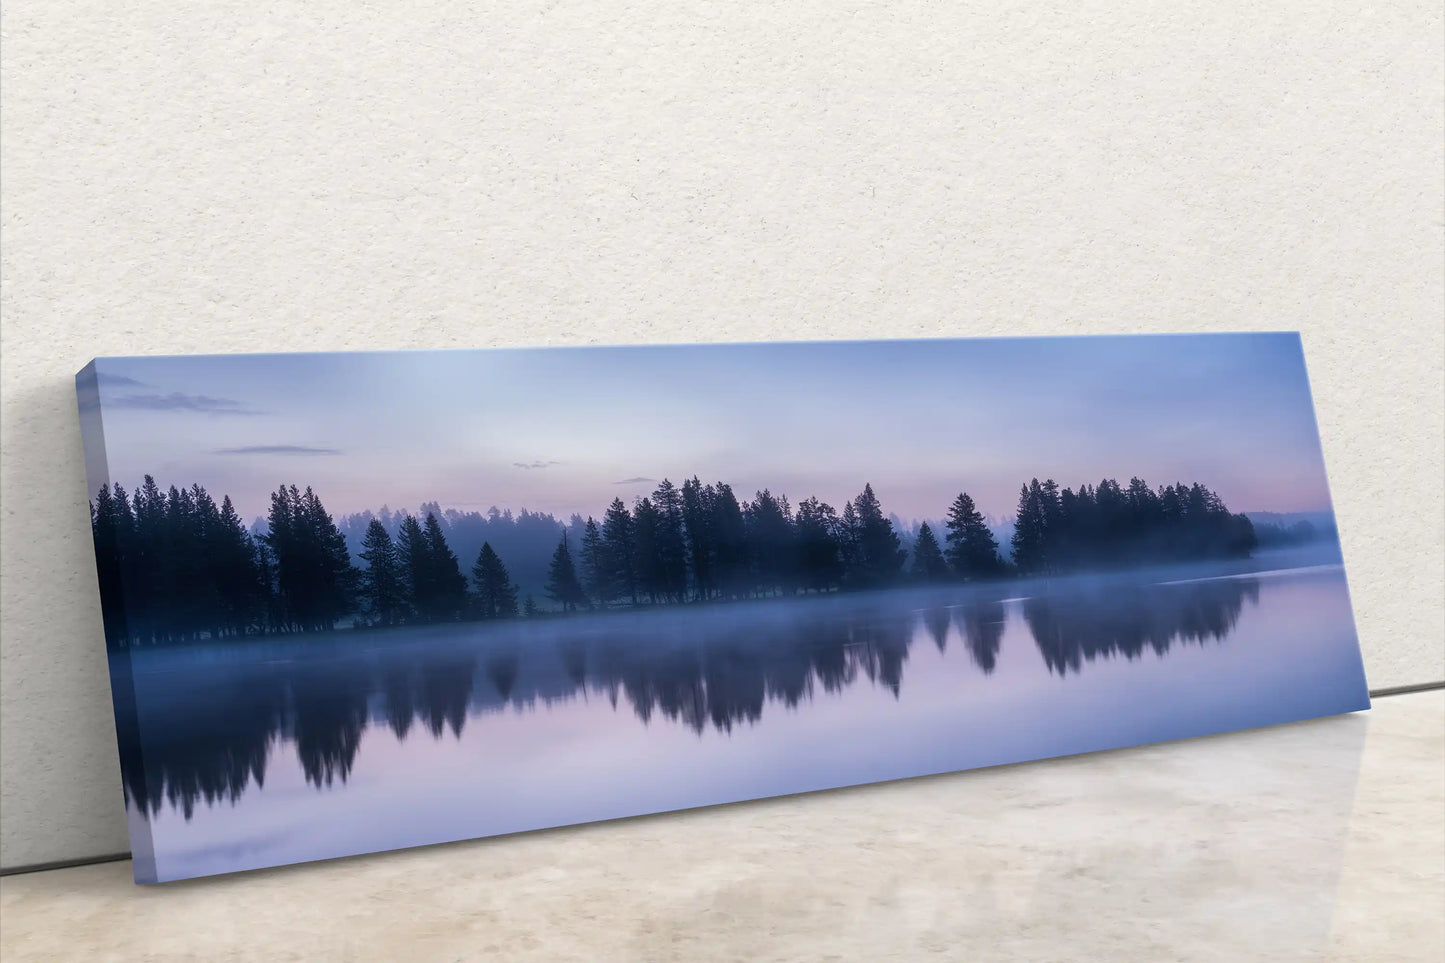 Front-leaning canvas artwork of Yellowstone Lake's serene sunrise, with mist-shrouded trees reflecting in still waters, symbolizing peace and stillness.